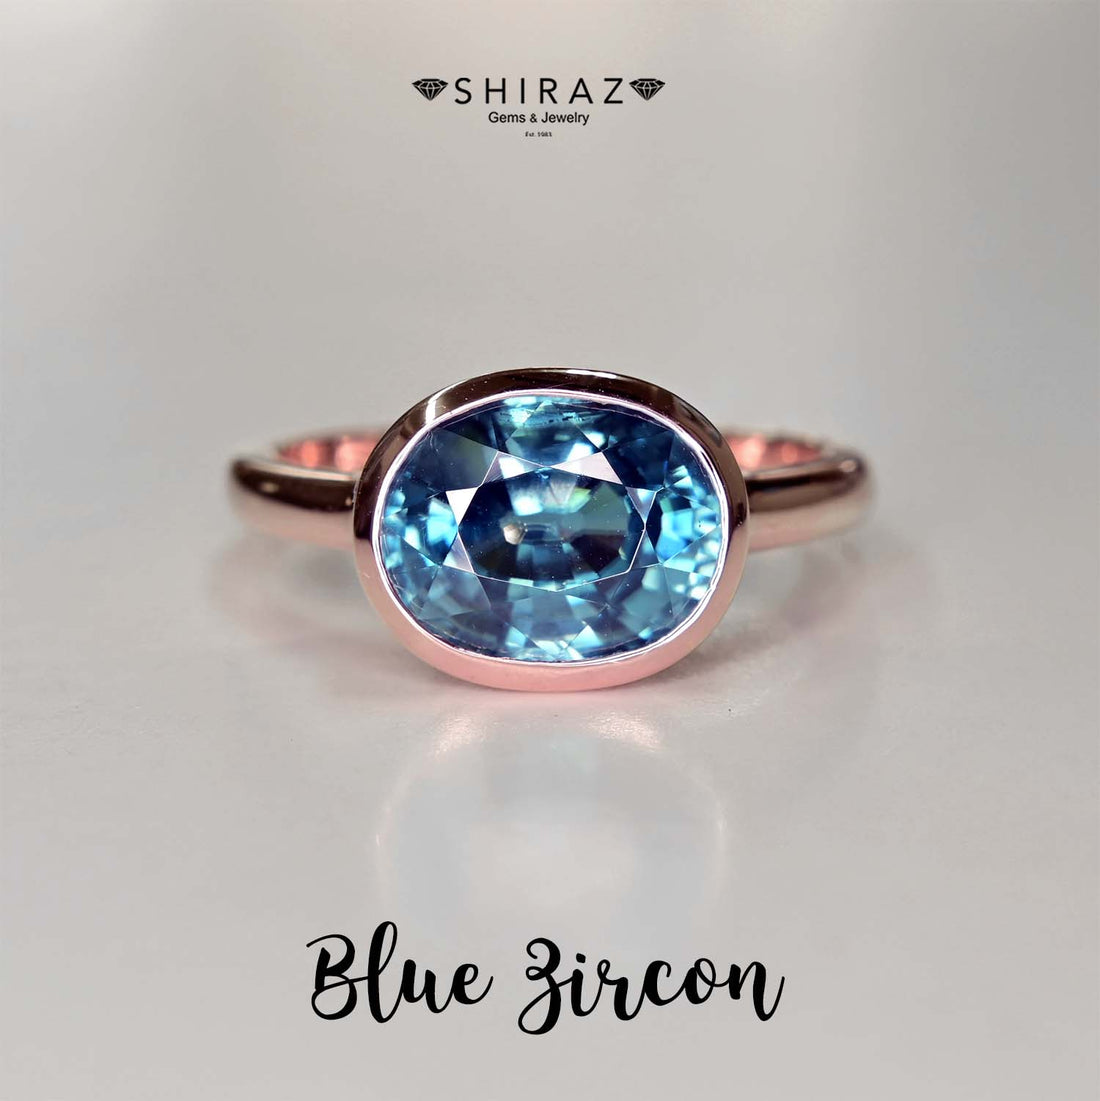 Blue zircon jewelry is a great option if you want to stand out from the crowd.